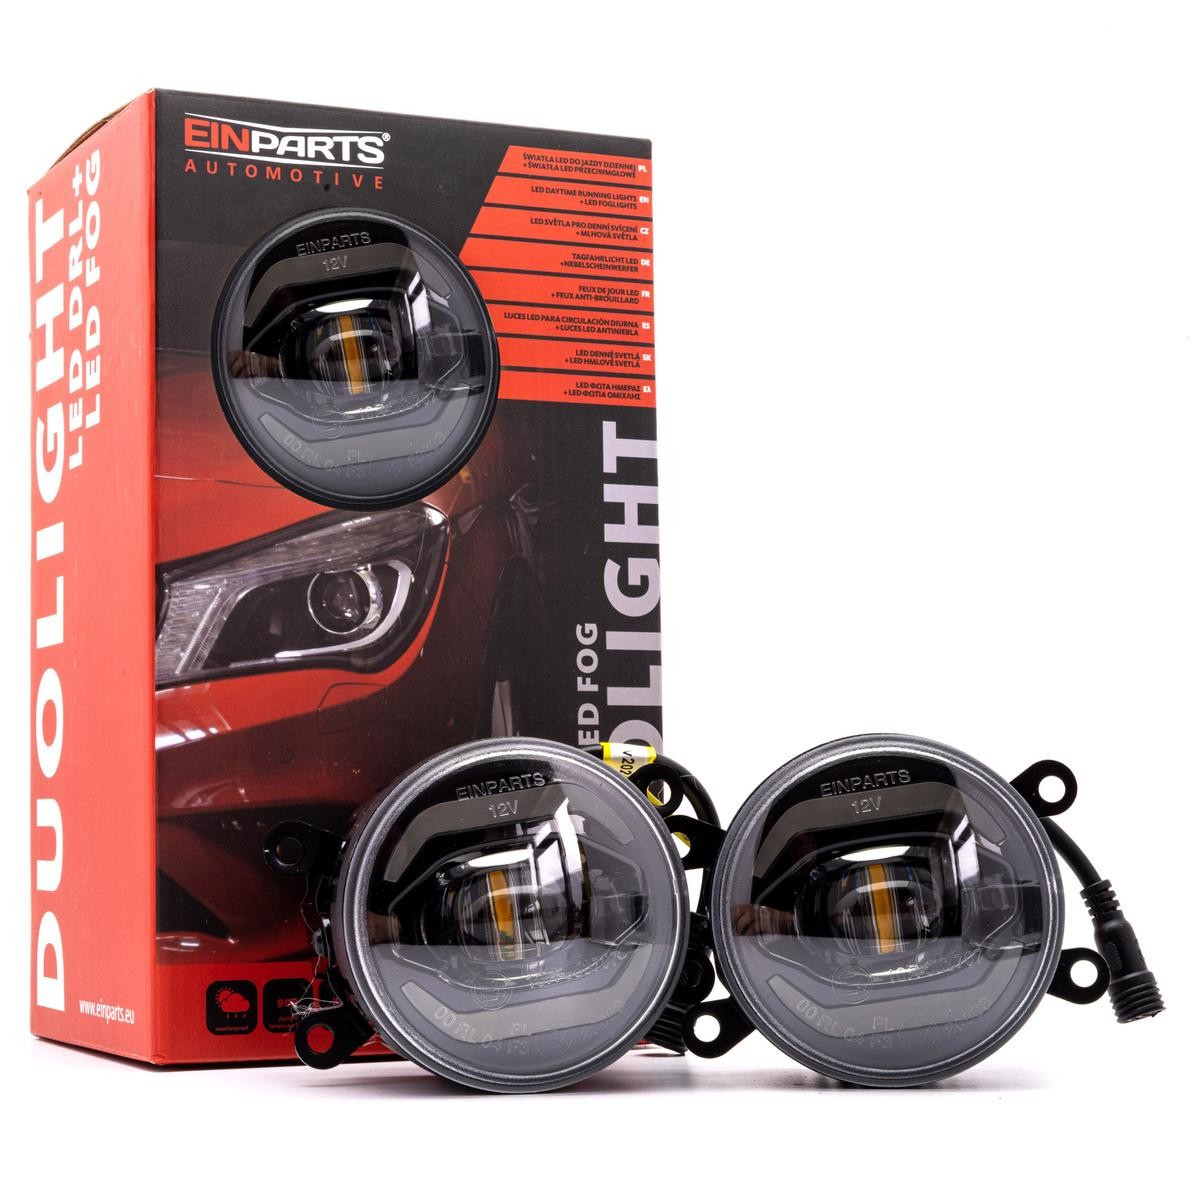 EINPARTS Fog light kit rear and front OPEL Astra G Caravan (T98) new DUOLIGHT DL39